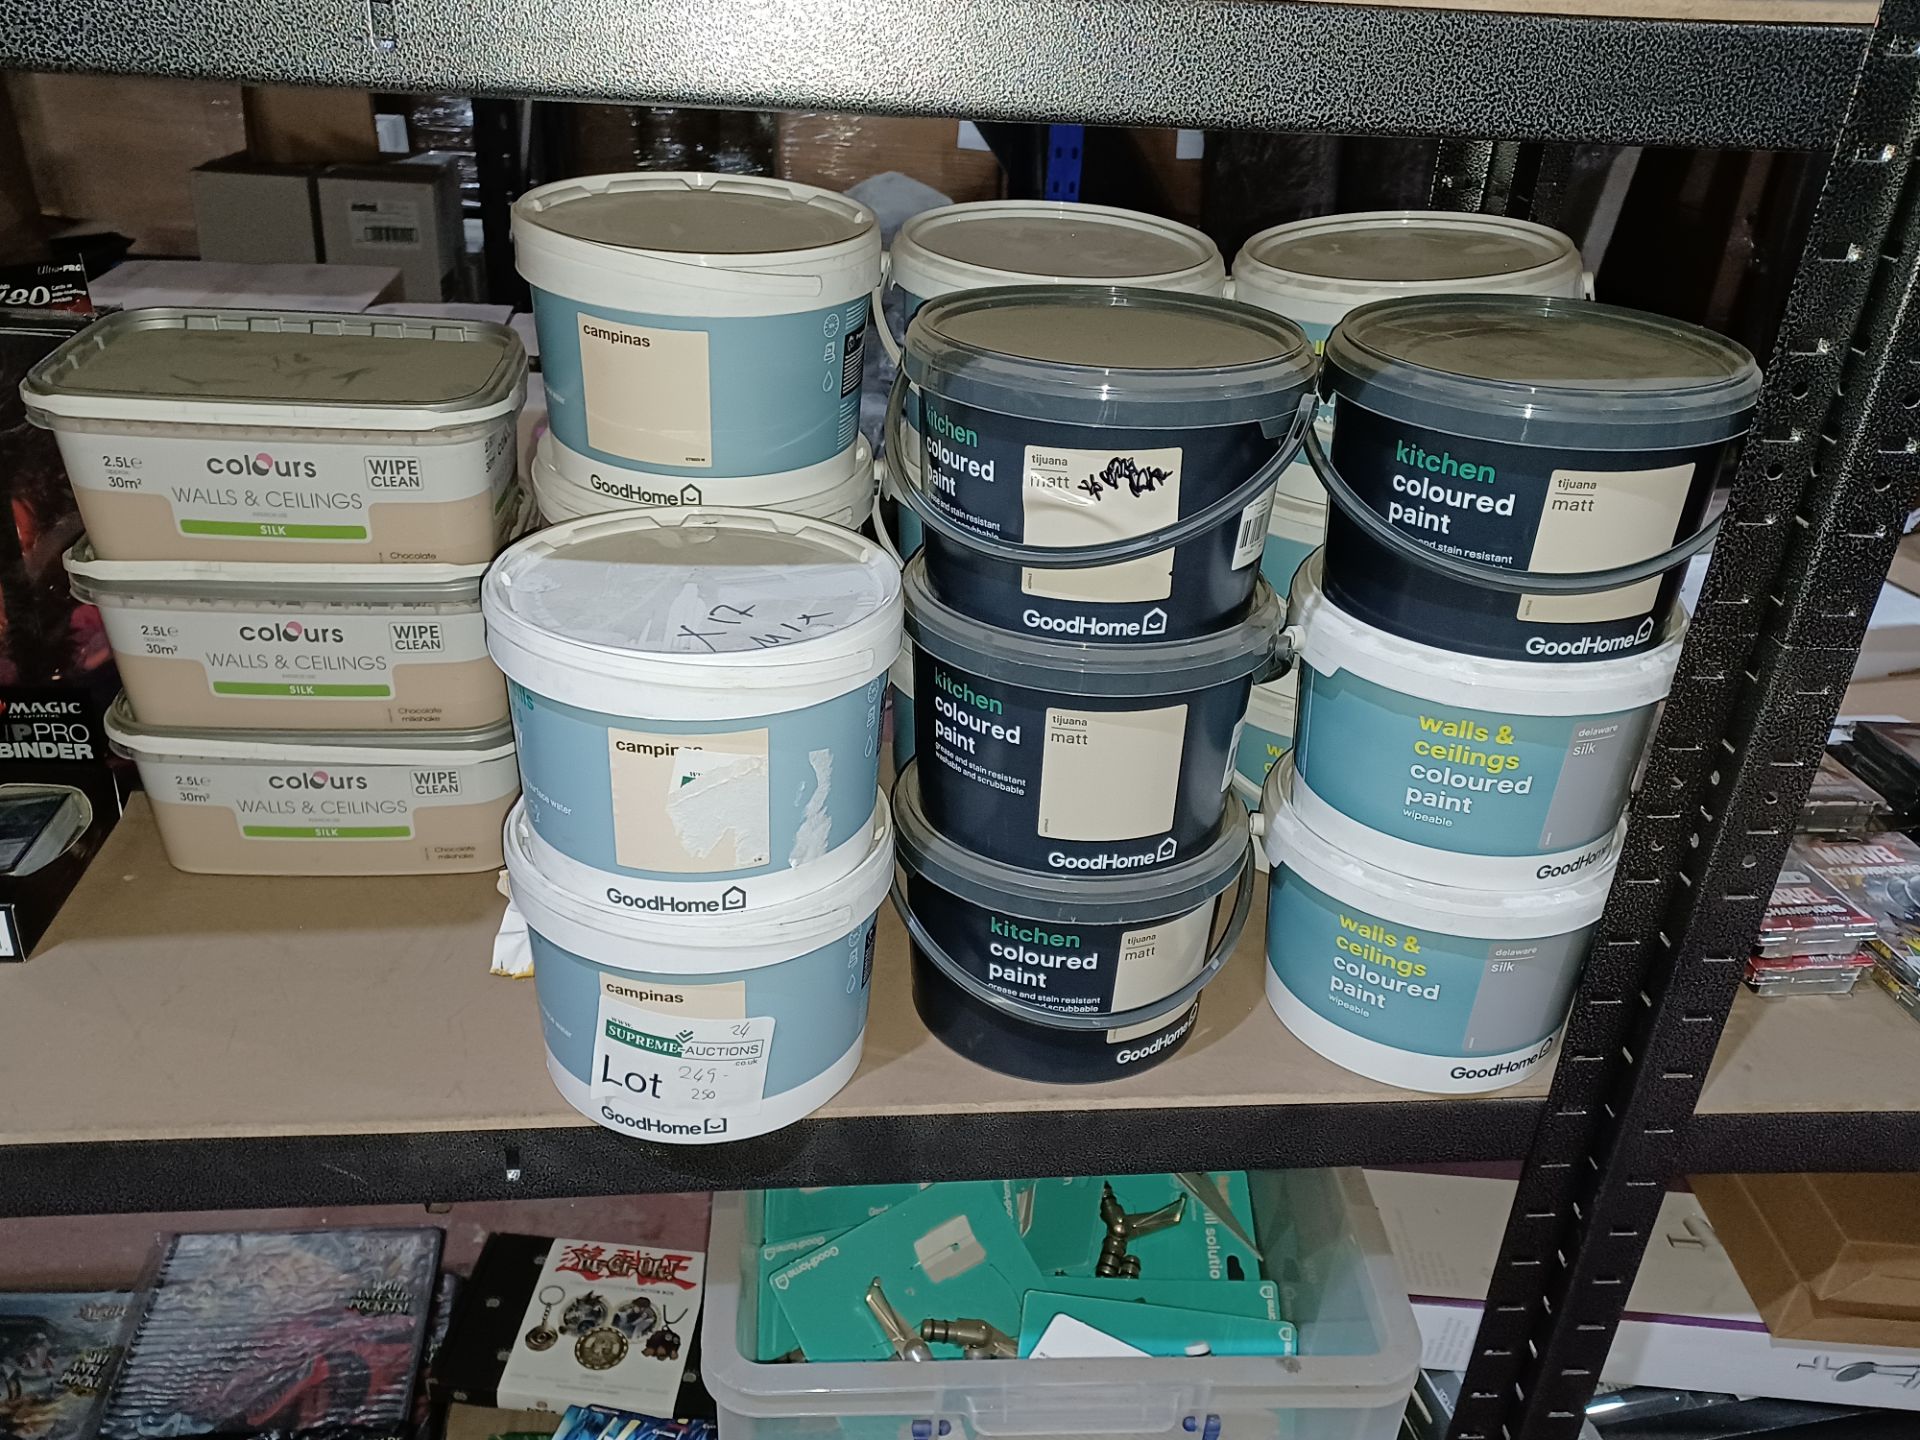 10 X MIXED PAINT ASSORTED LOT MAY INCLUDE COLOURS SILK WALL & CEILINGS GOODHOME MATT, GOODHOME